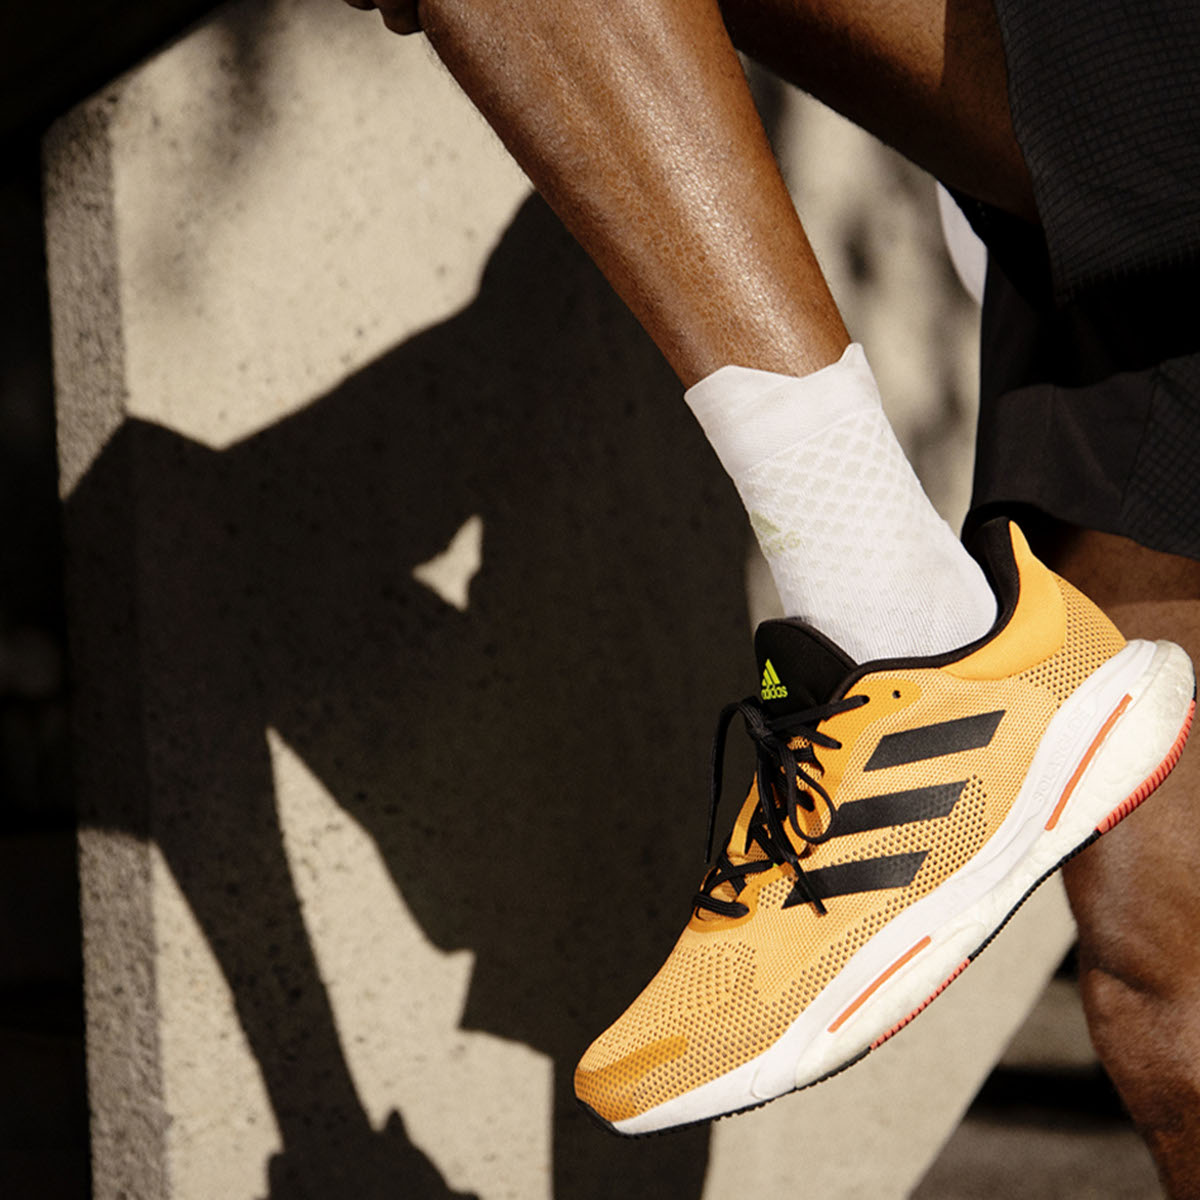 Adidas Solar Glide Review: Bright, But Not Light | peacecommission.kdsg ...